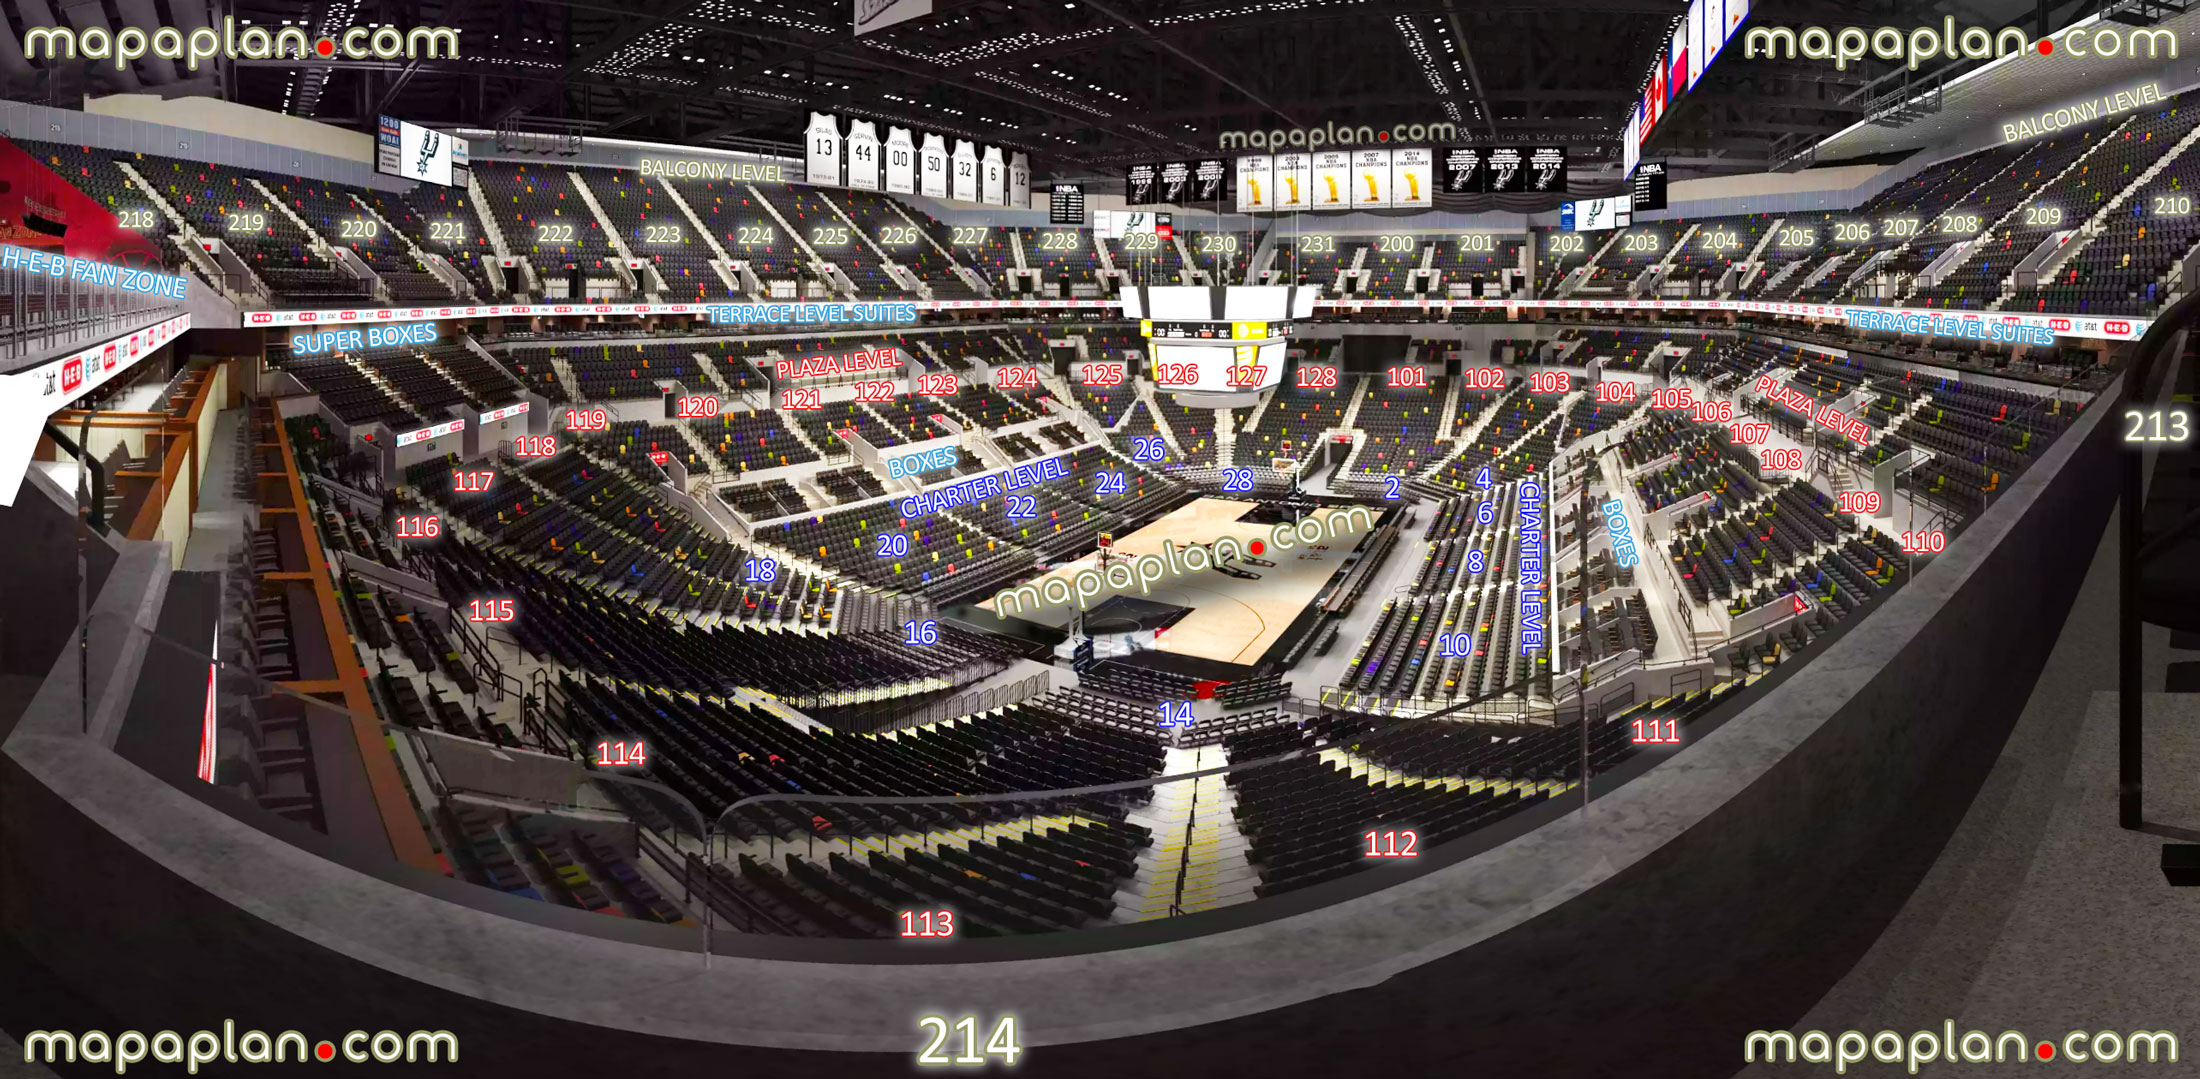 view section 214 row 1 seat 2 san antonio spurs nba tx stars wnba ncaa basketball tournament game panorama charter 100 plaza terrace 200 balcony level heb fan zone courtside club level vip boxes premium suites San Antonio Frost Bank Center seating chart